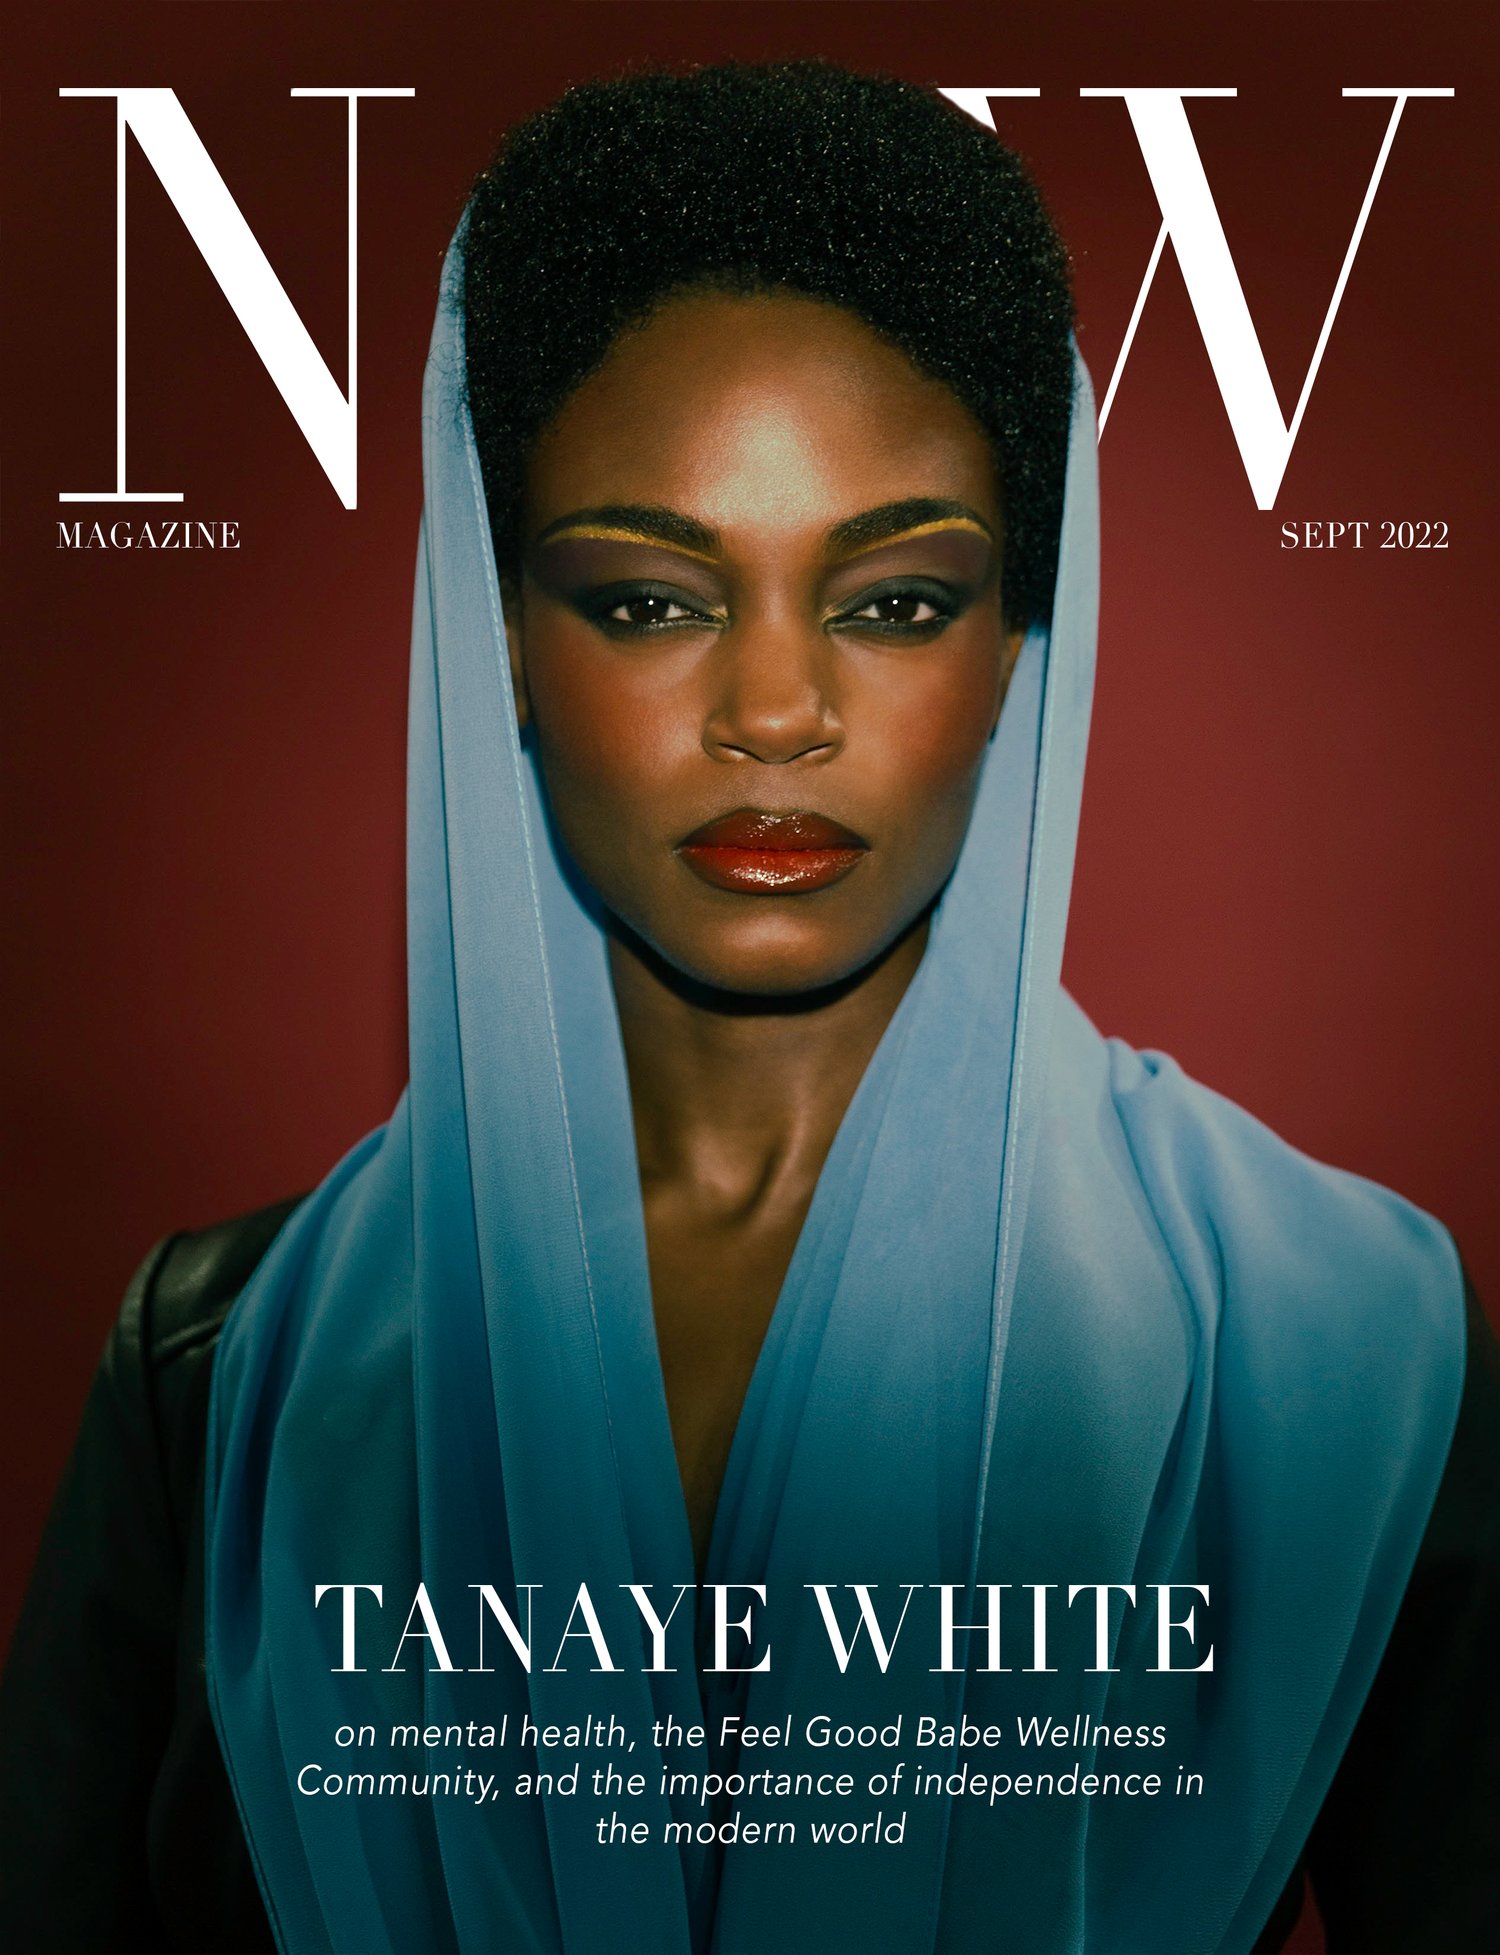 Model Tanaye White Talks Mental Health: “It takes a lot of courage